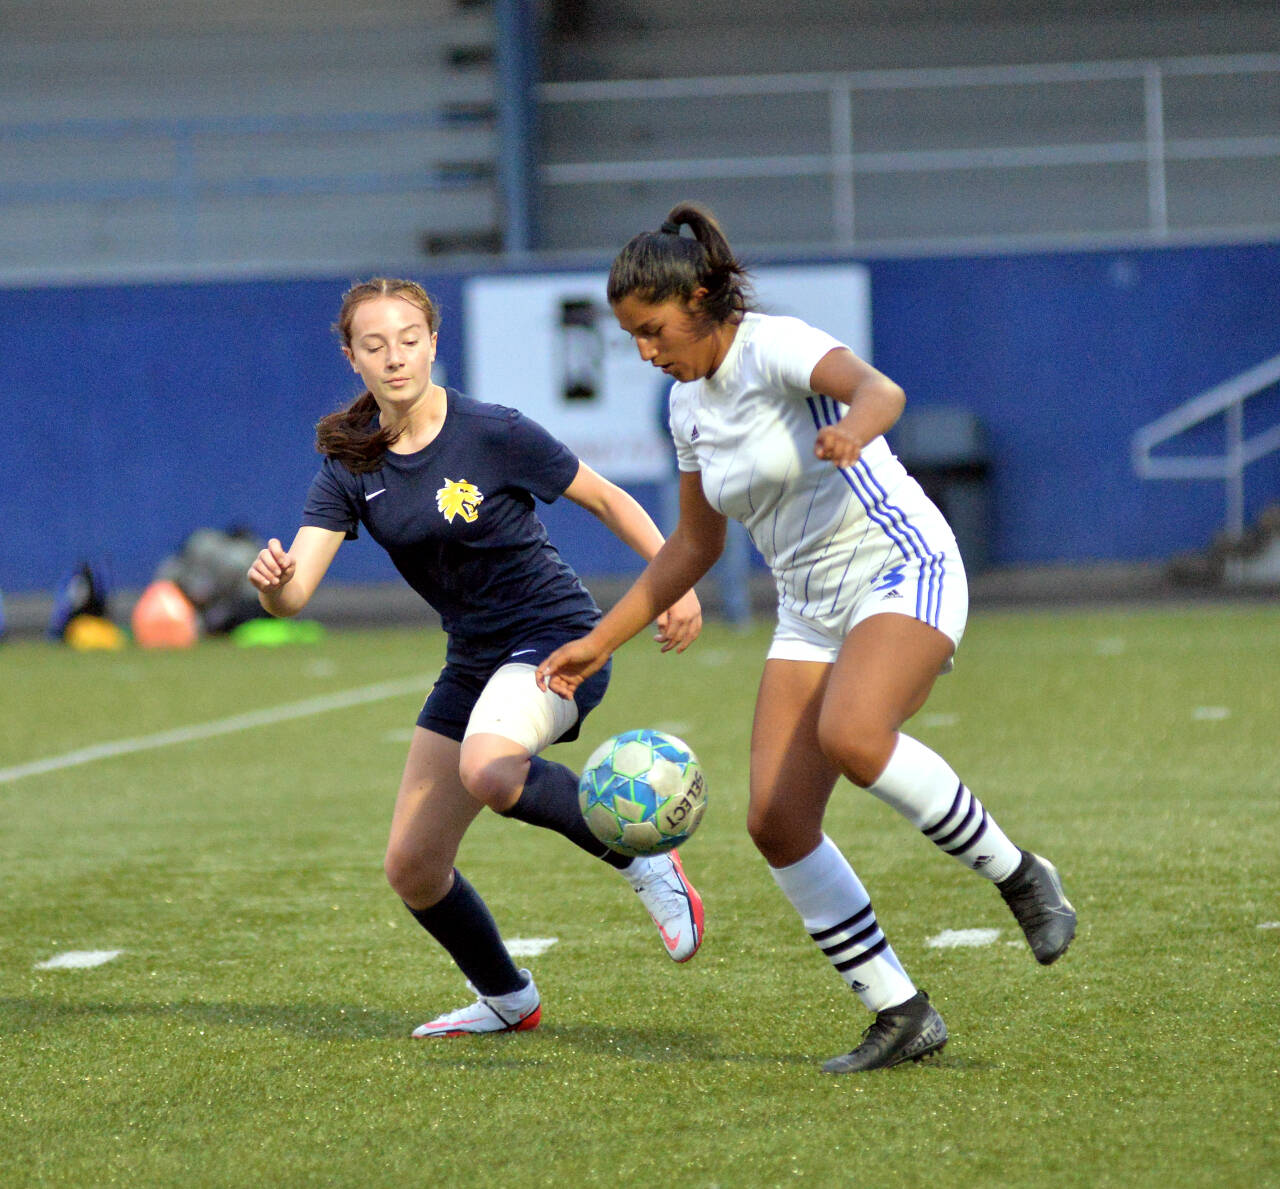 RYAN SPARKS | THE DAILY WORLD Aberdeen’s Annie Troeh and Elma’s Diana Guzman attempt to gain possession during the Bobcats’ 1-0 victory on Saturday at Stewart Field in Aberdeen.